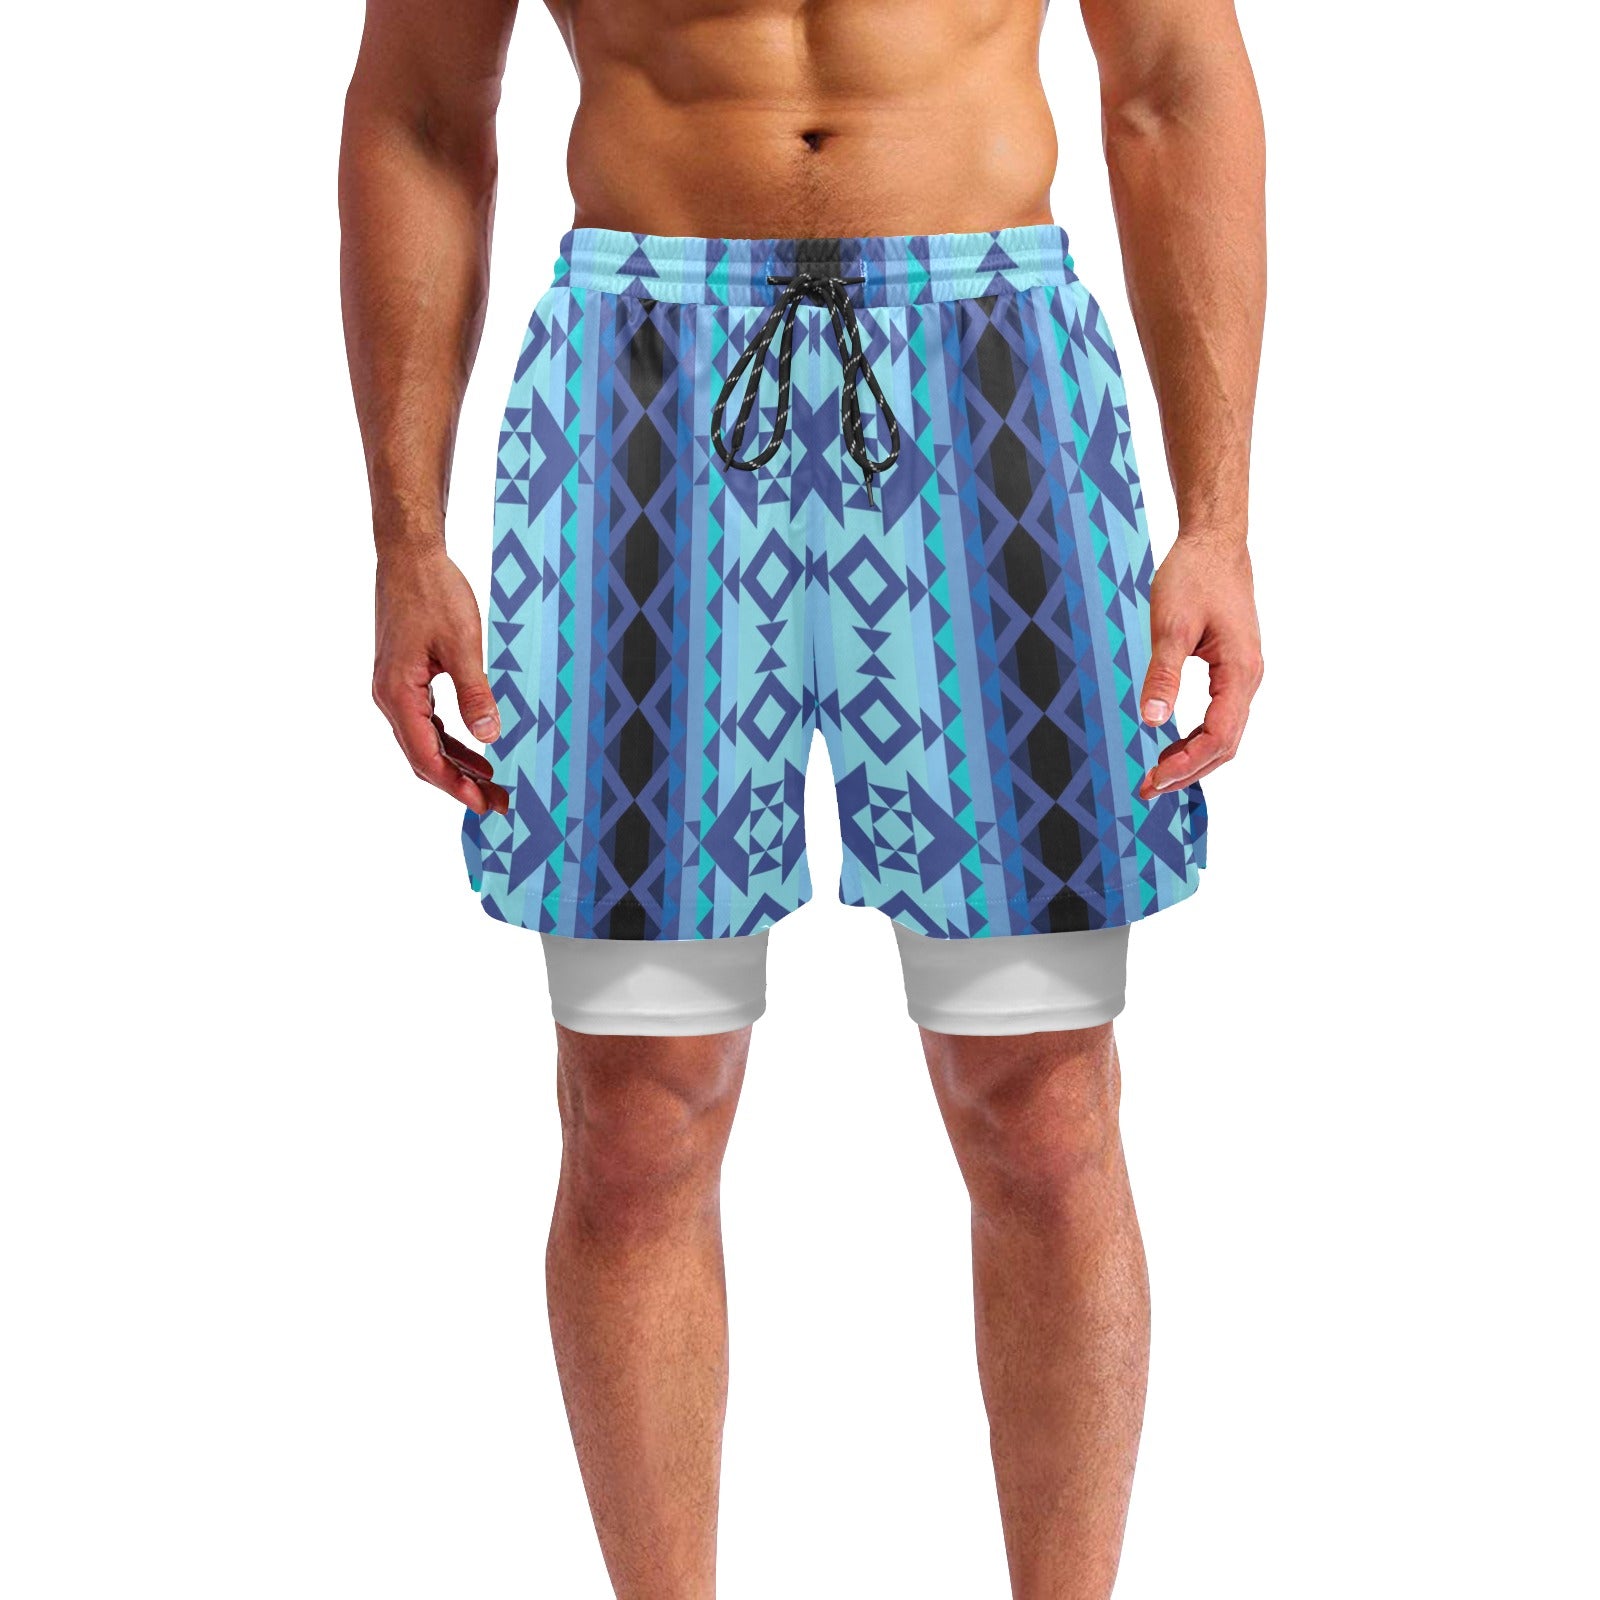 Tipi Men's Sports Shorts with Compression Liner